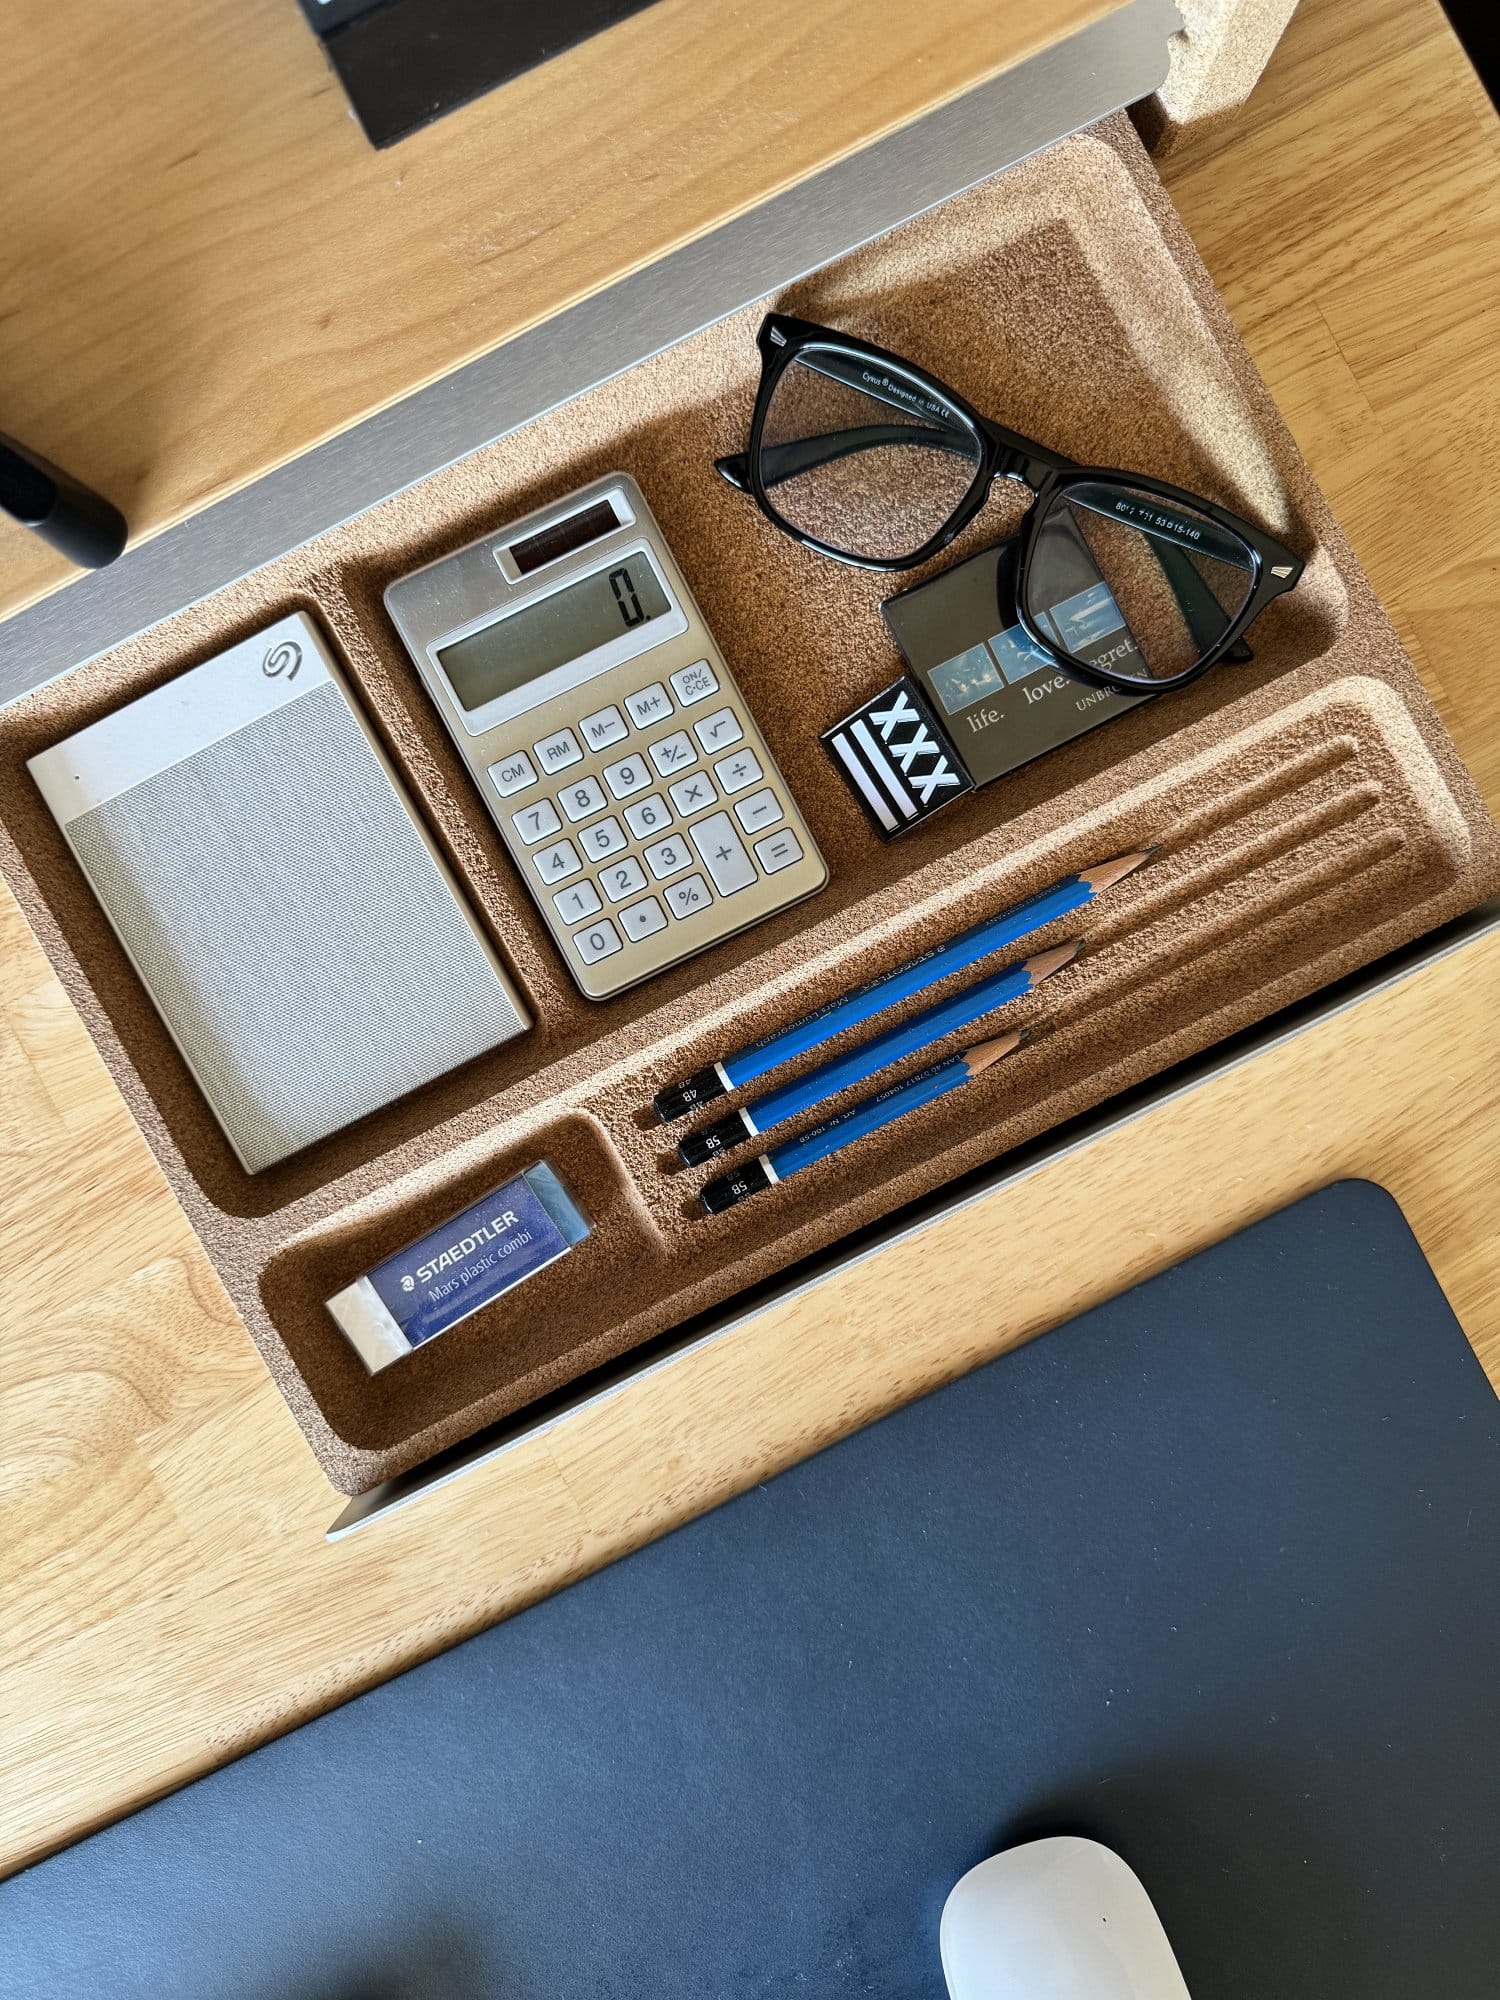  An overhead view of a desk organiser containing a calculator, spectacles, a small notebook, and blue pencils on a wooden desk next to a computer mouse